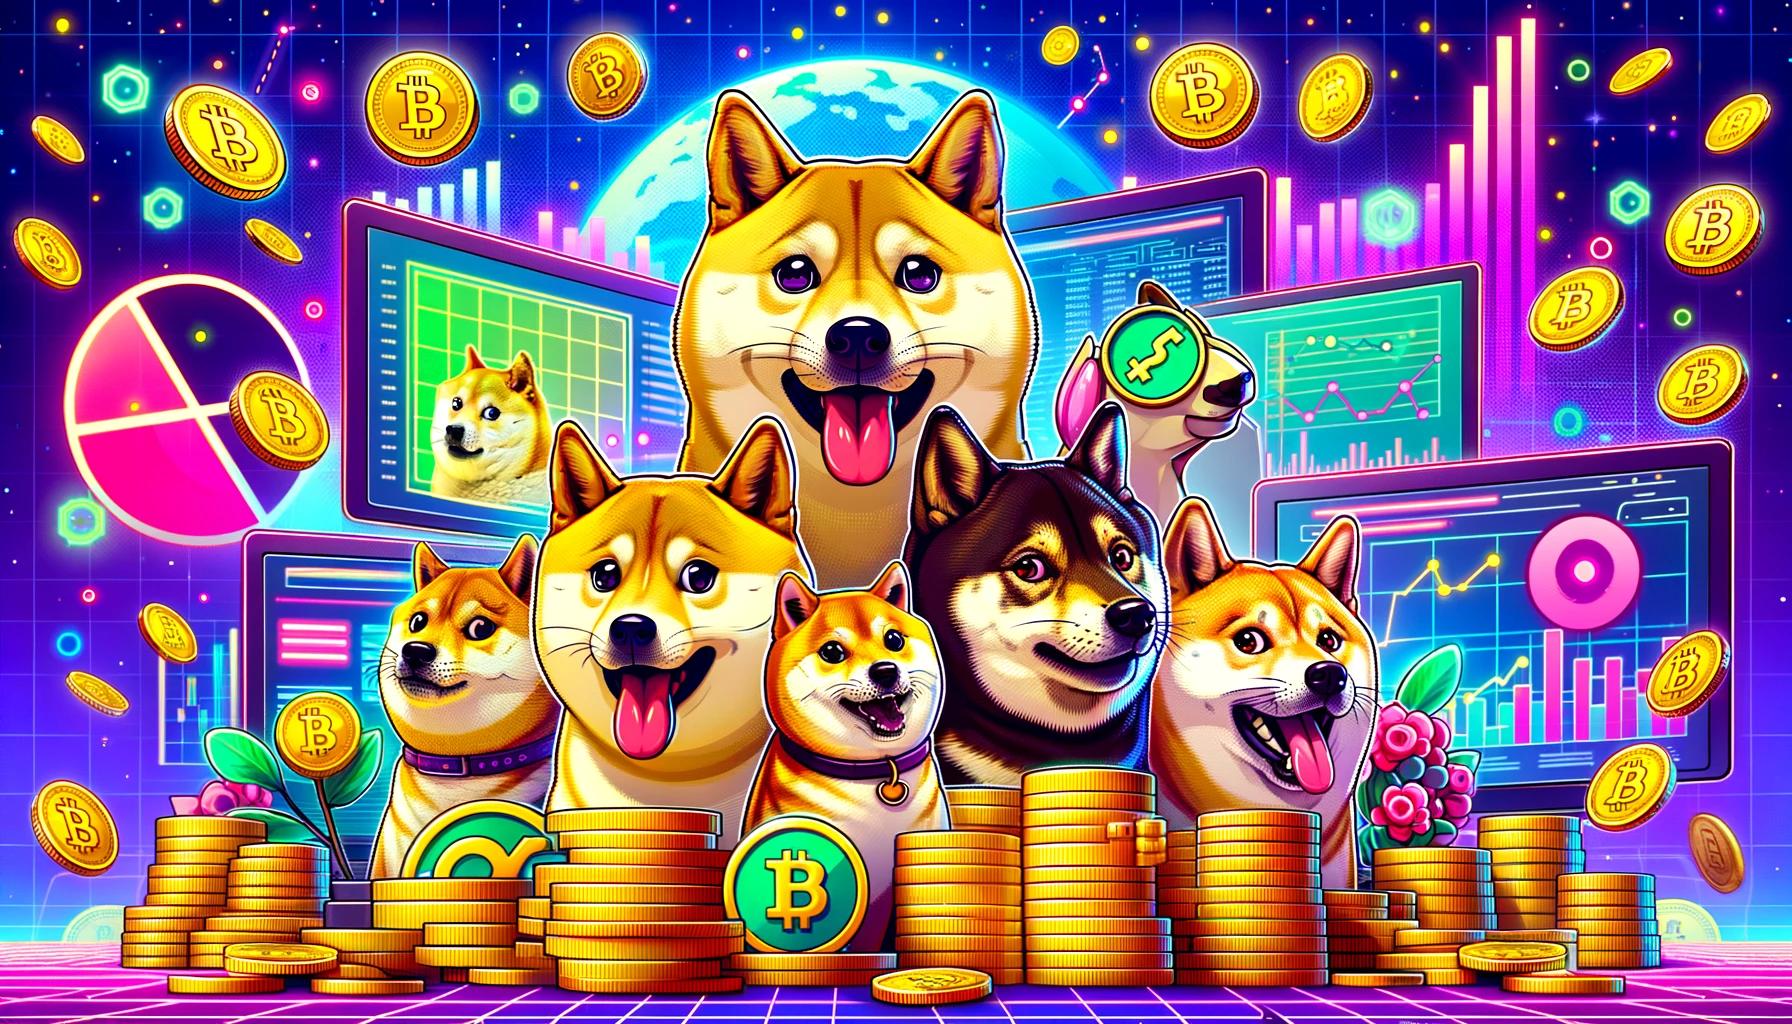 Cover Image for The Rise of Meme Coins: From Doge to Catamoto and Beyond